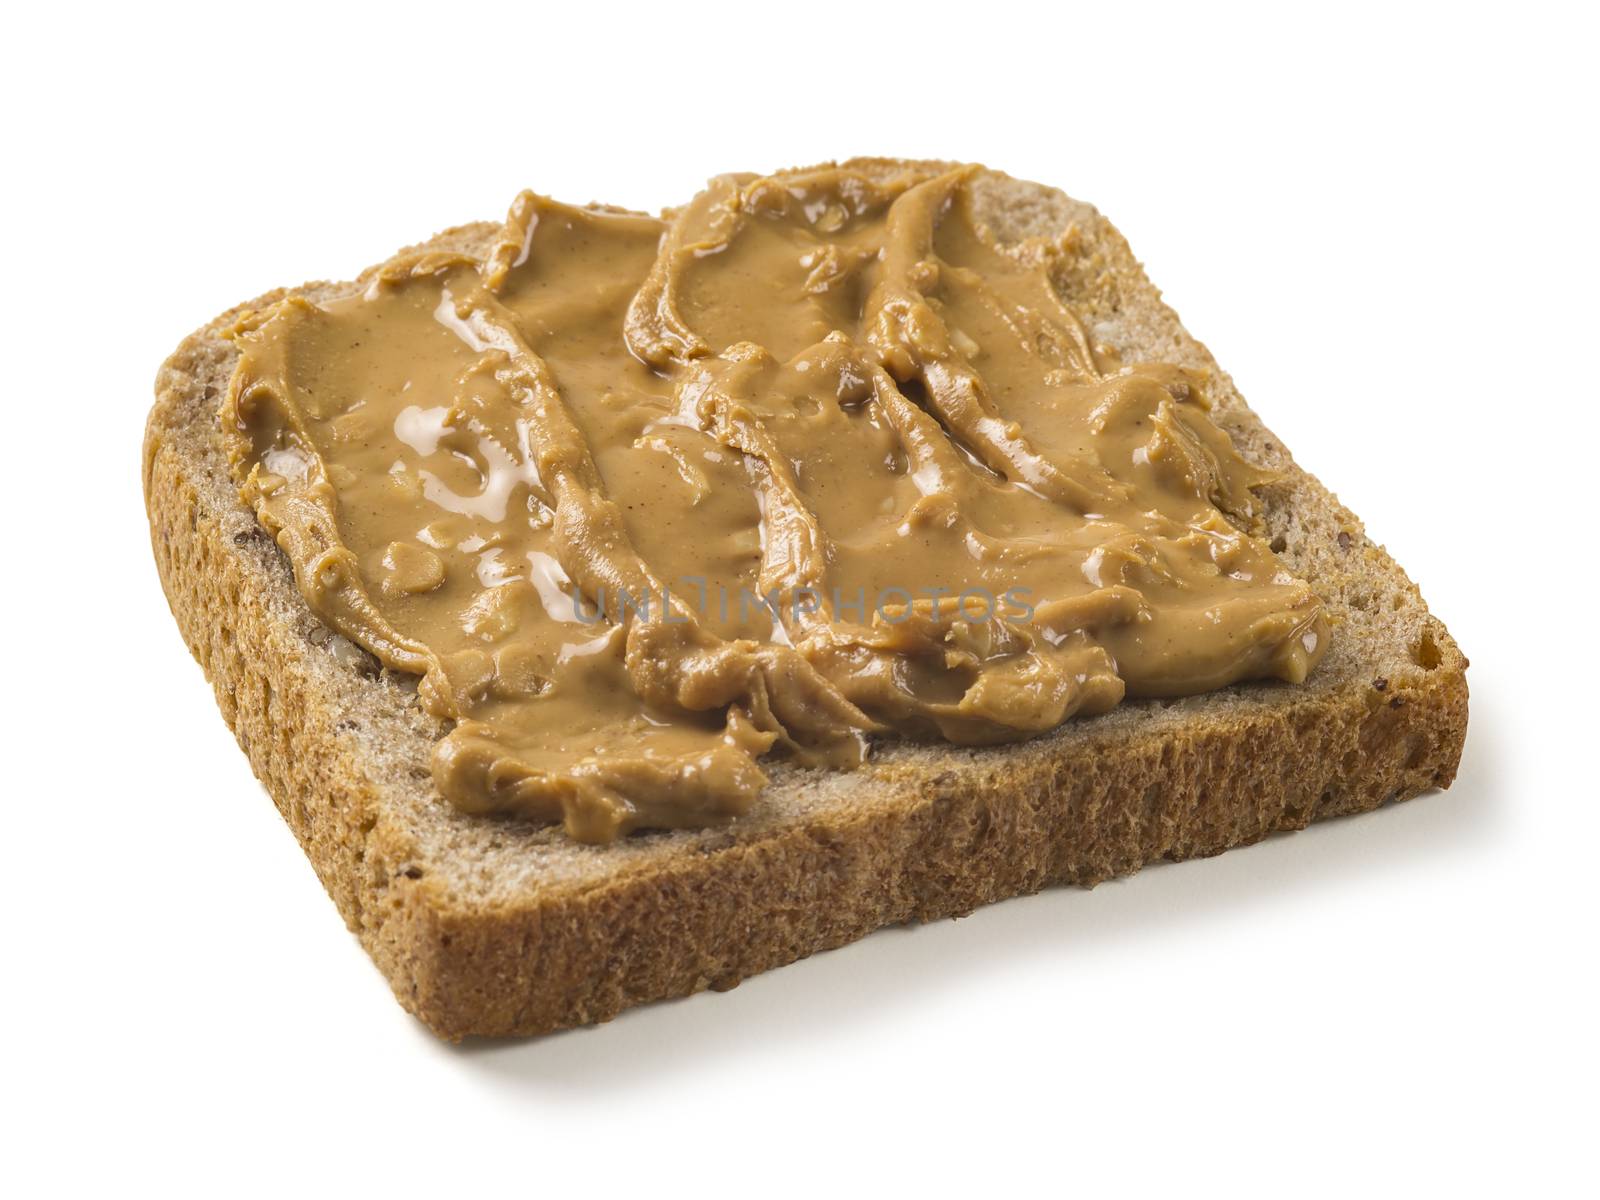 Whole wheat bread with peanut butter by sumners